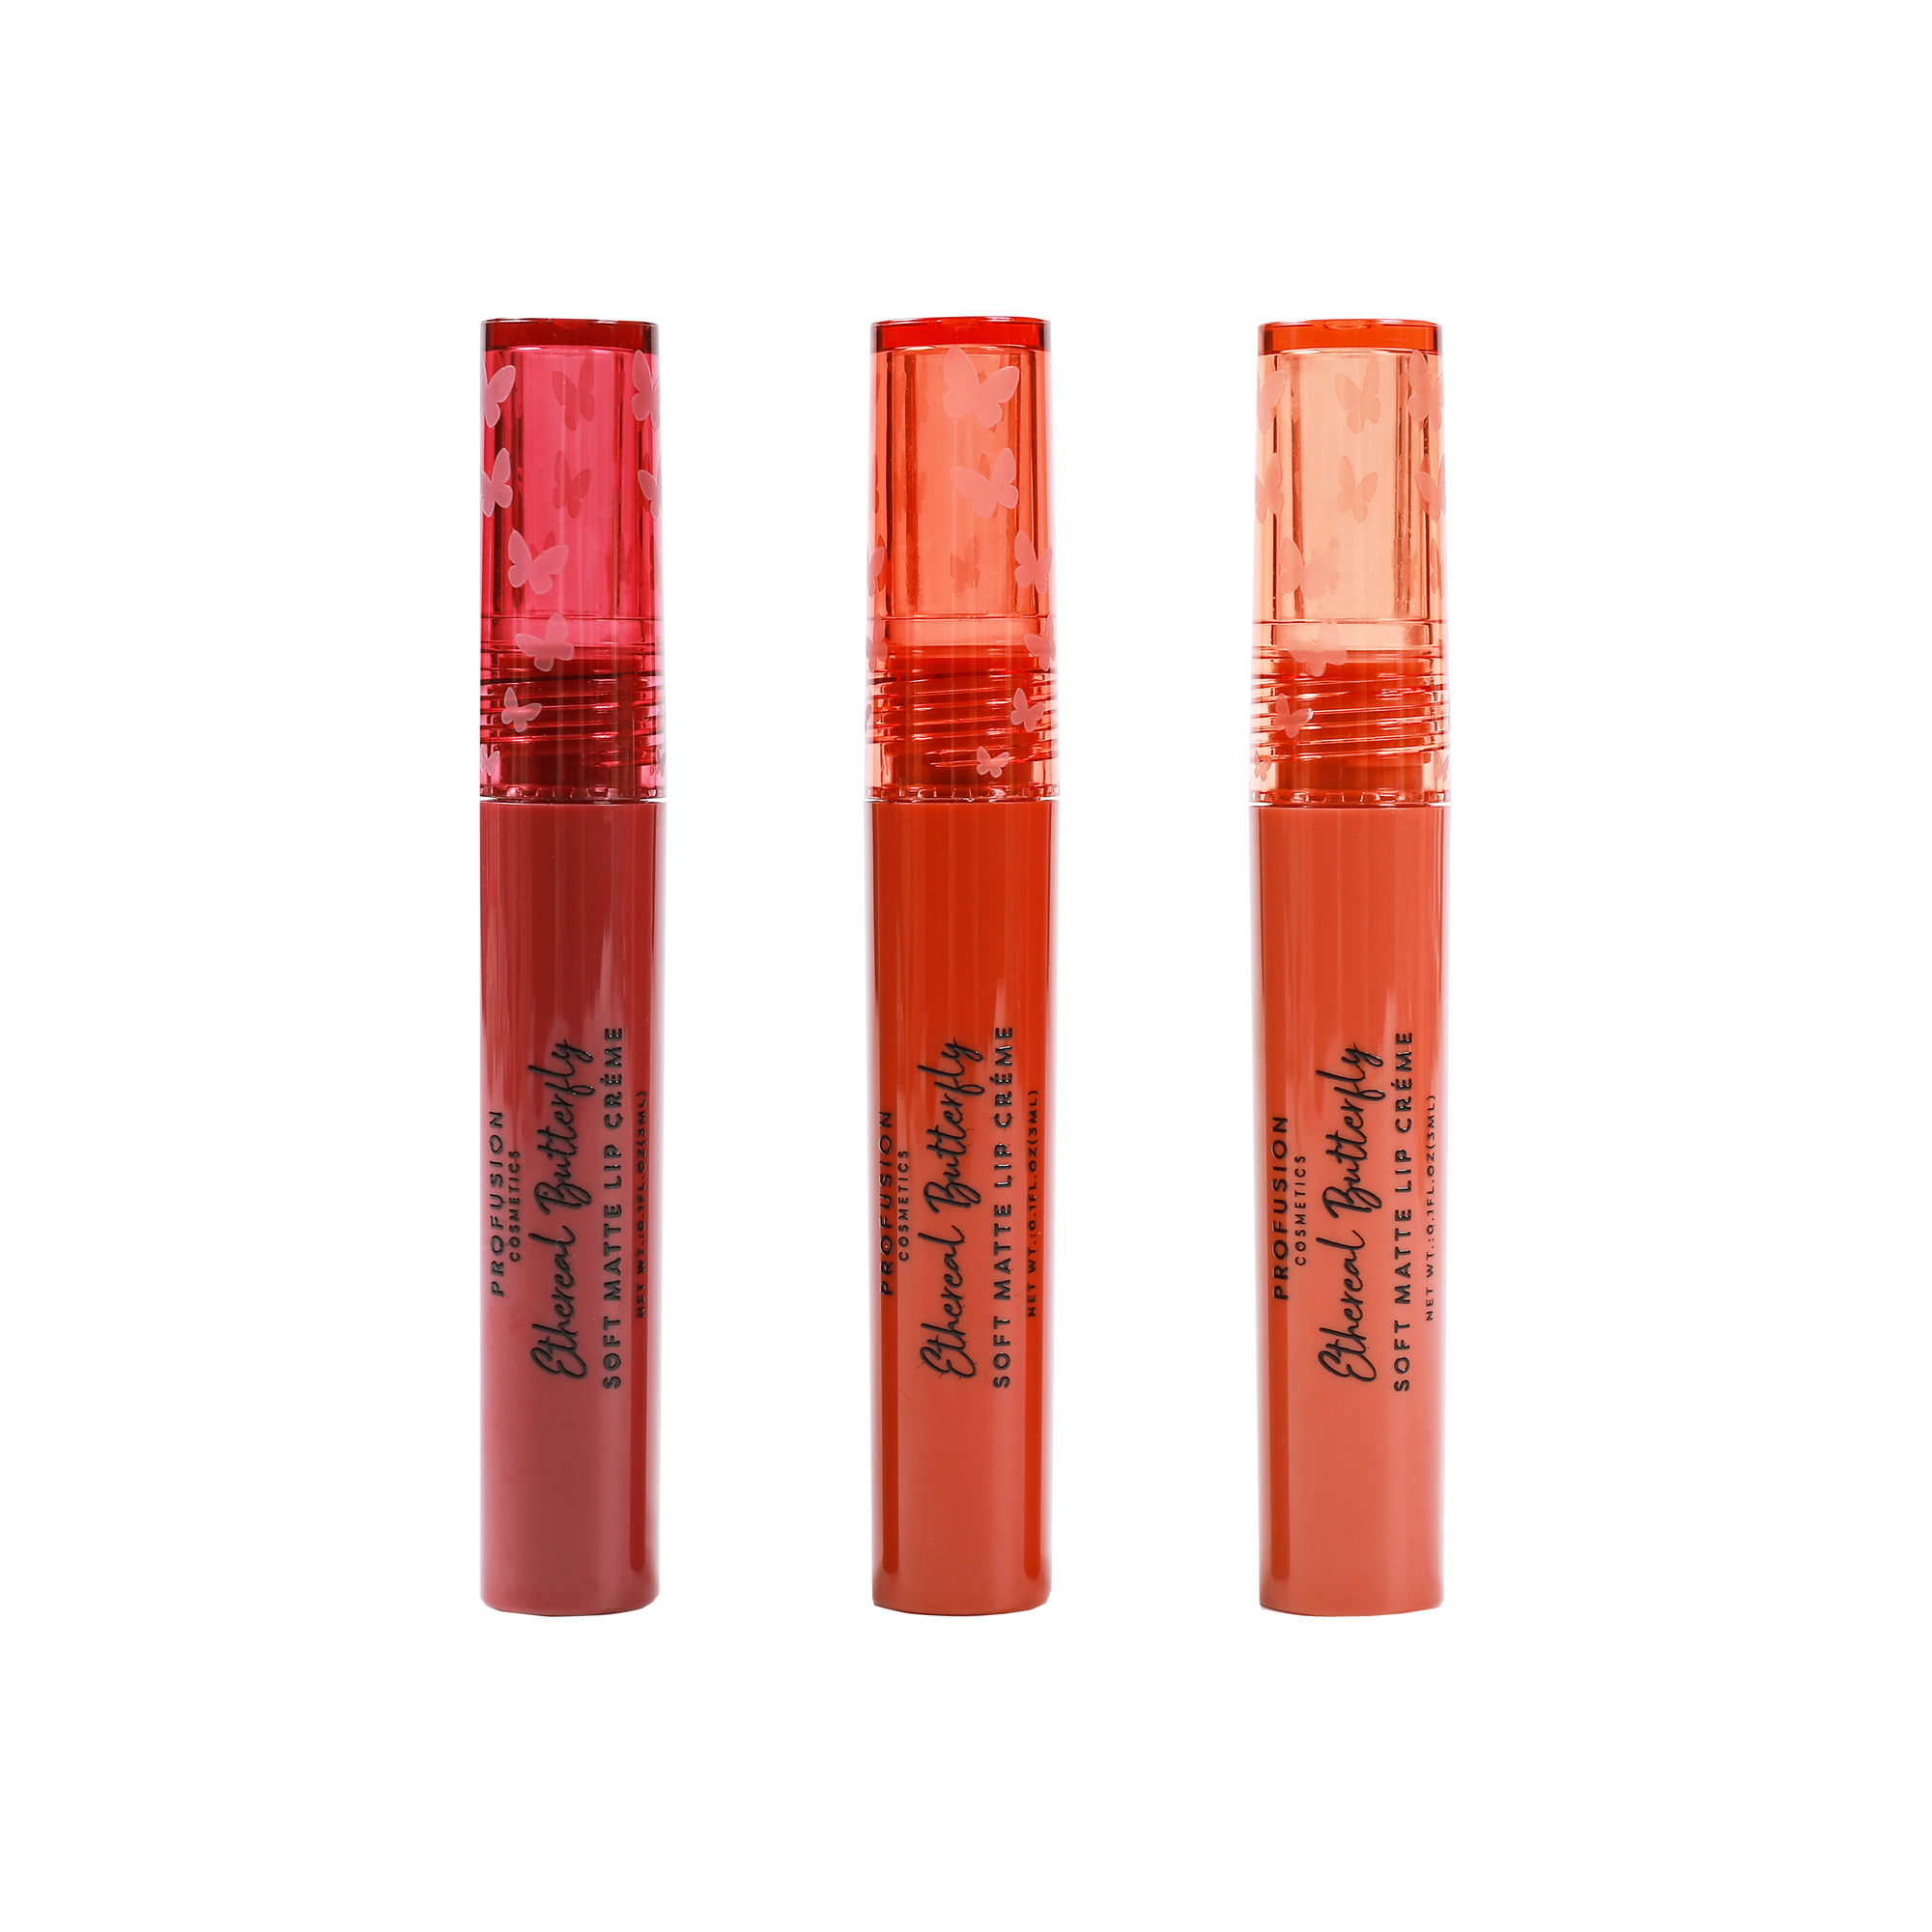 Ethereal Butterfly, Soft Matte Lip Creme Set